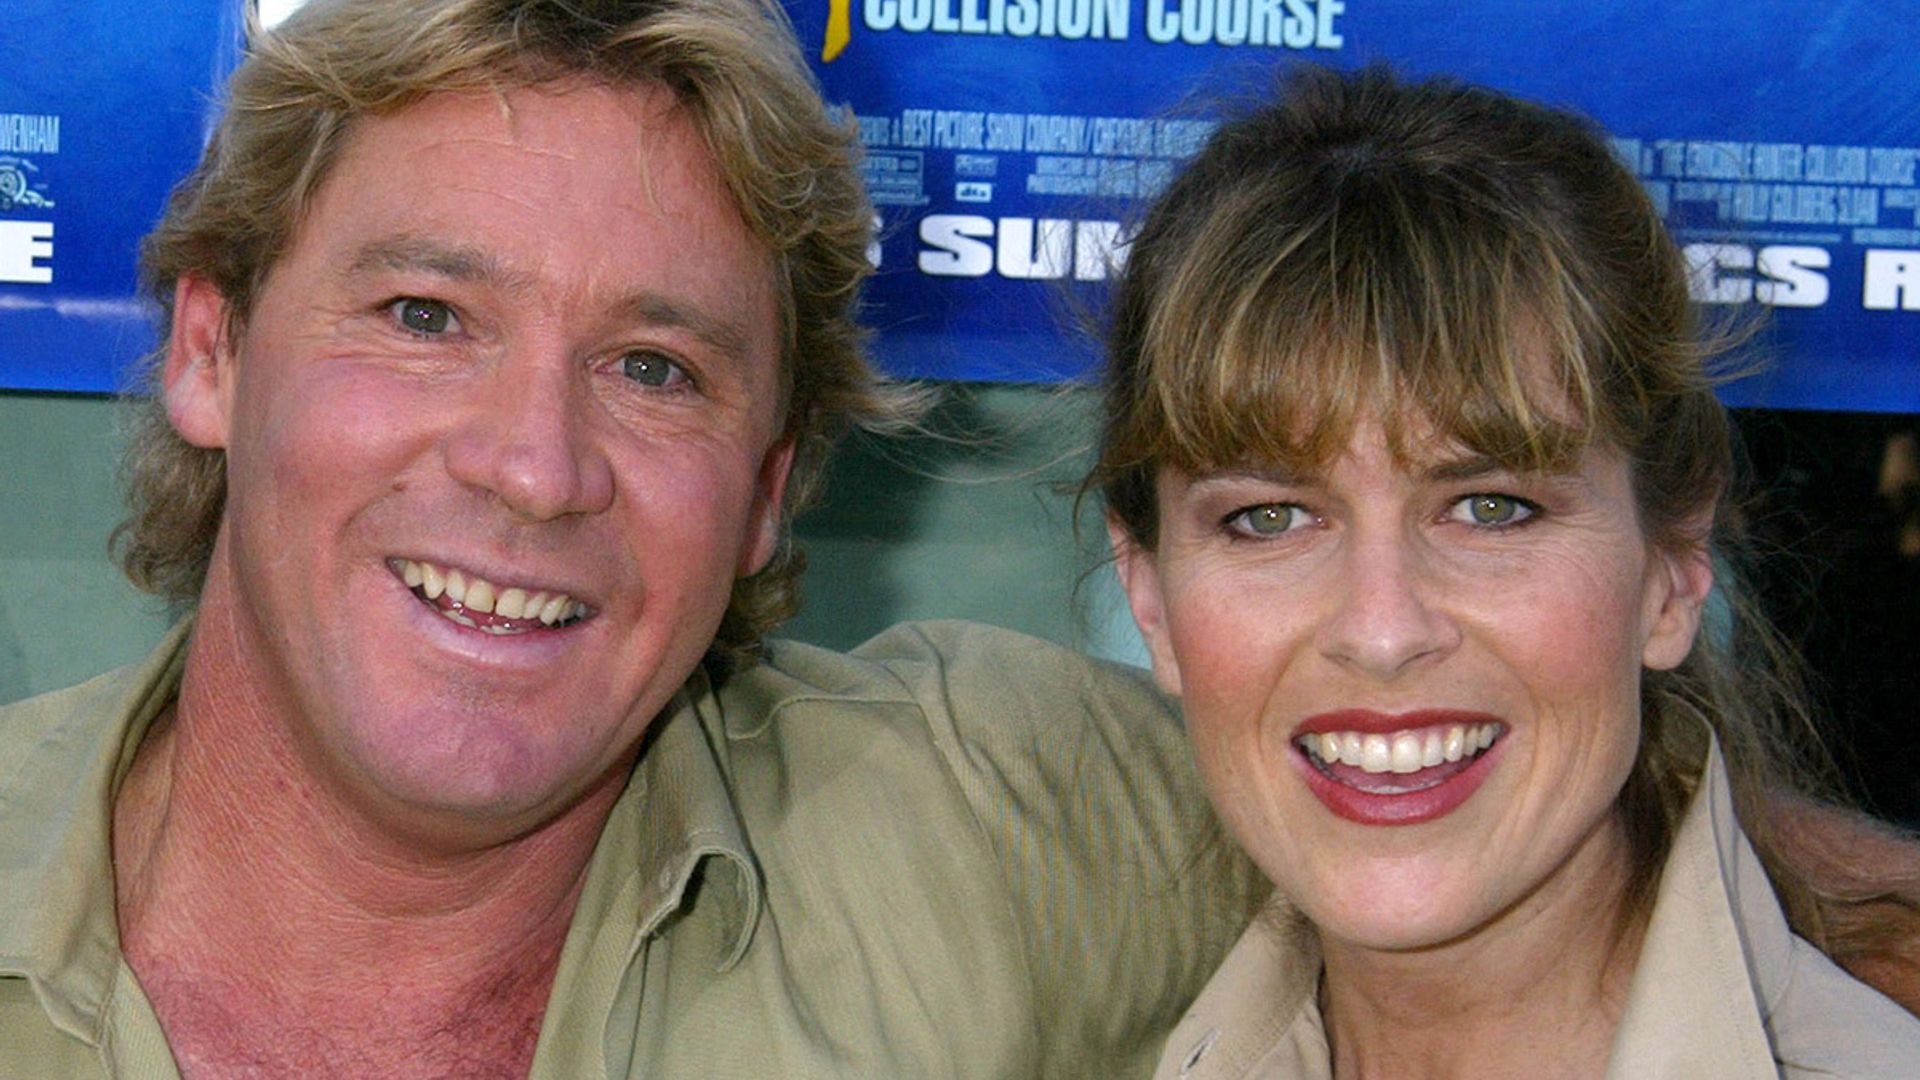 Bindi Irwin's parents Steve and Terri got married after eight months - inside whirlwind relationship